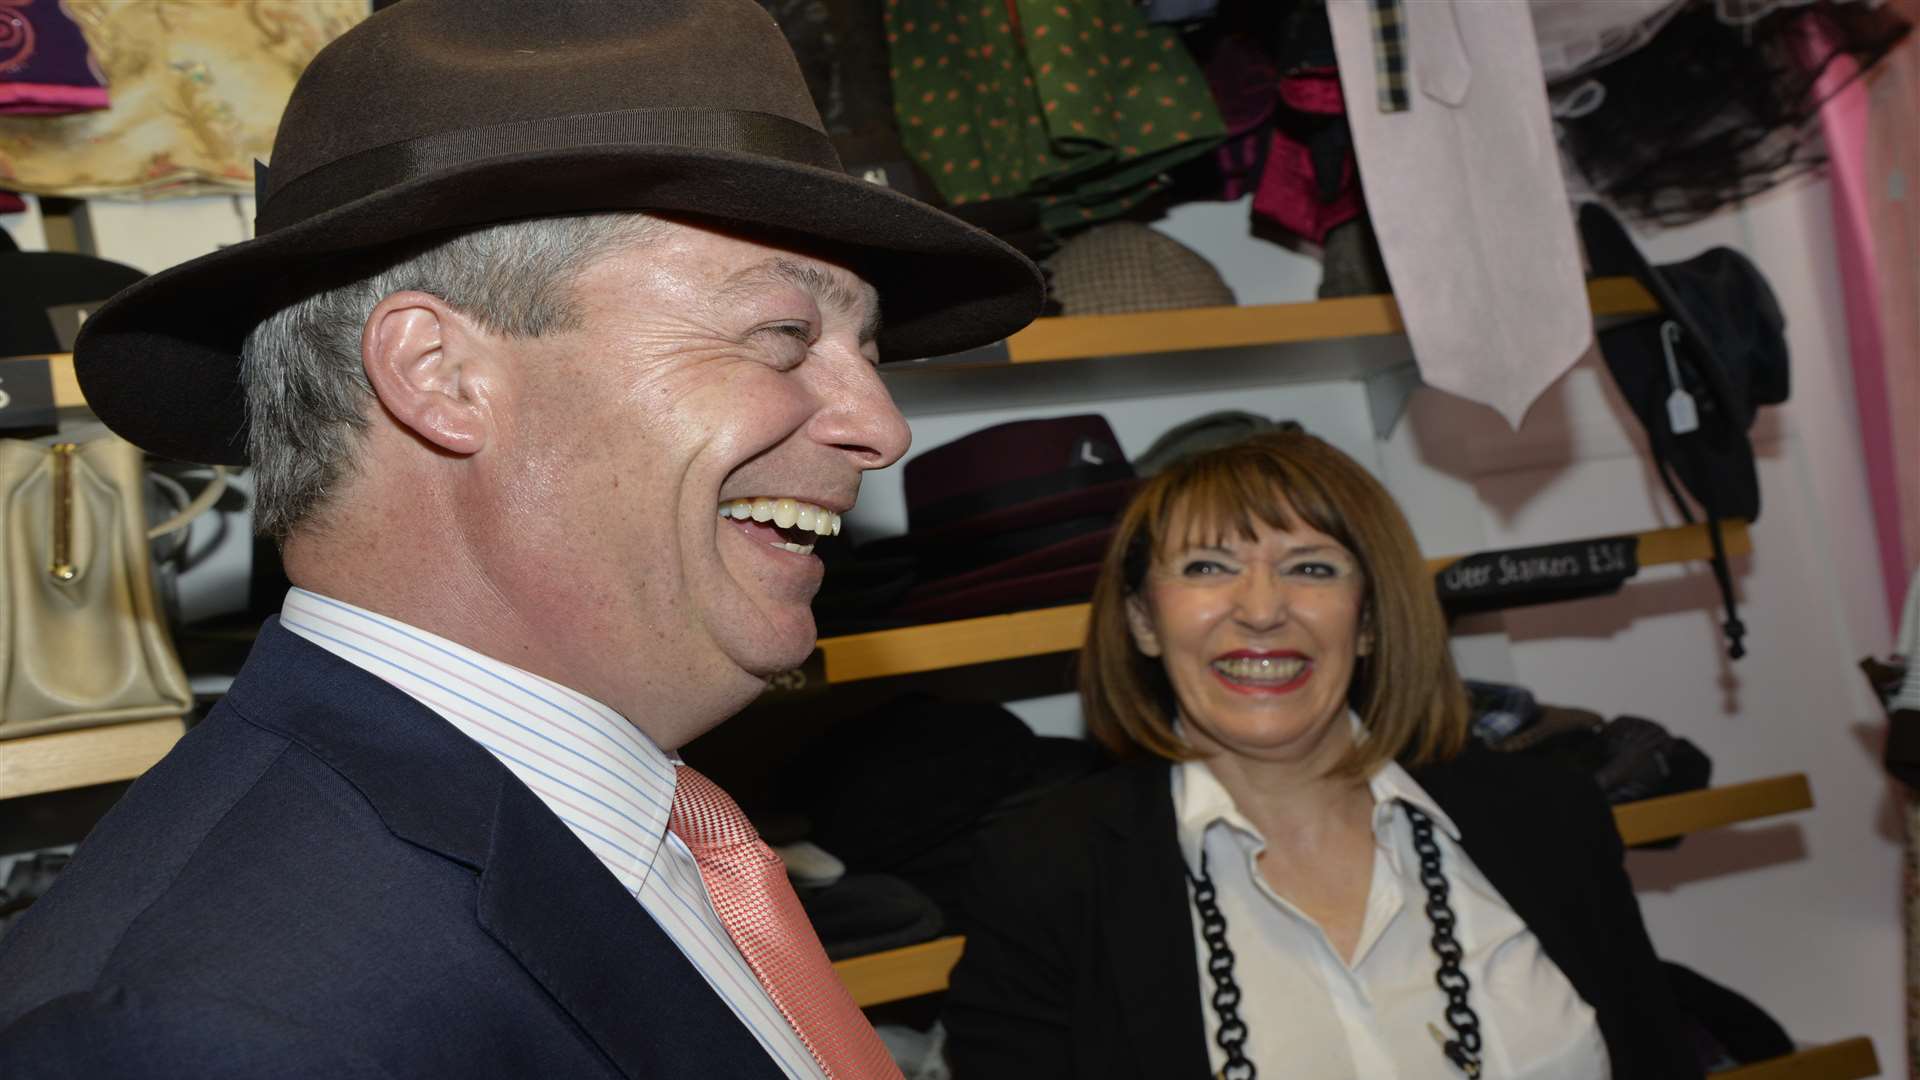 The Ukip leader chatted and browsed the clothing at a store